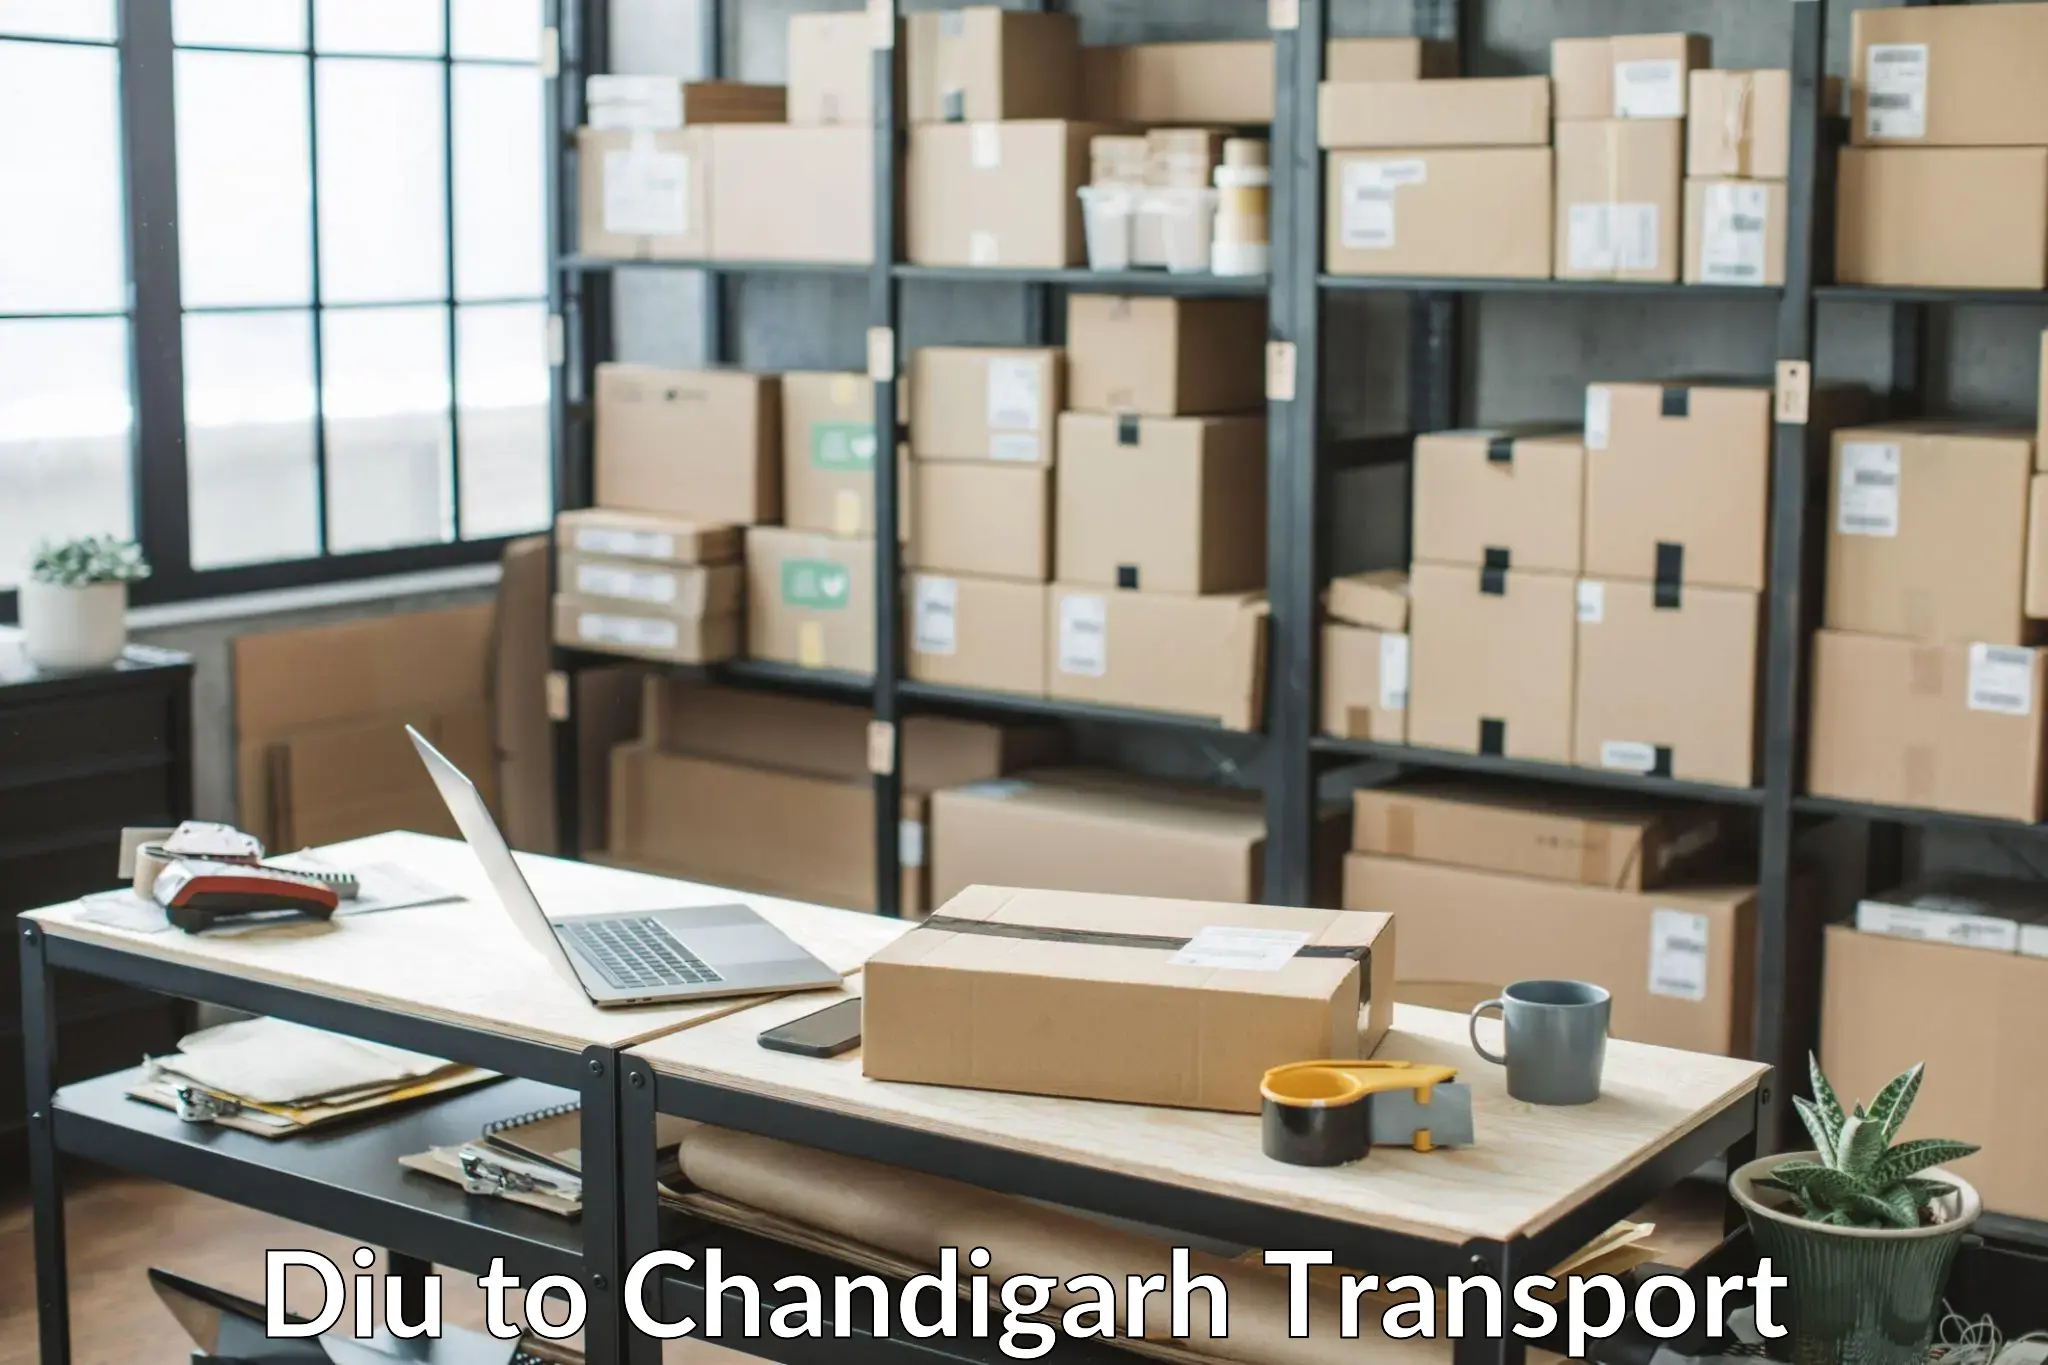 Land transport services Diu to Chandigarh